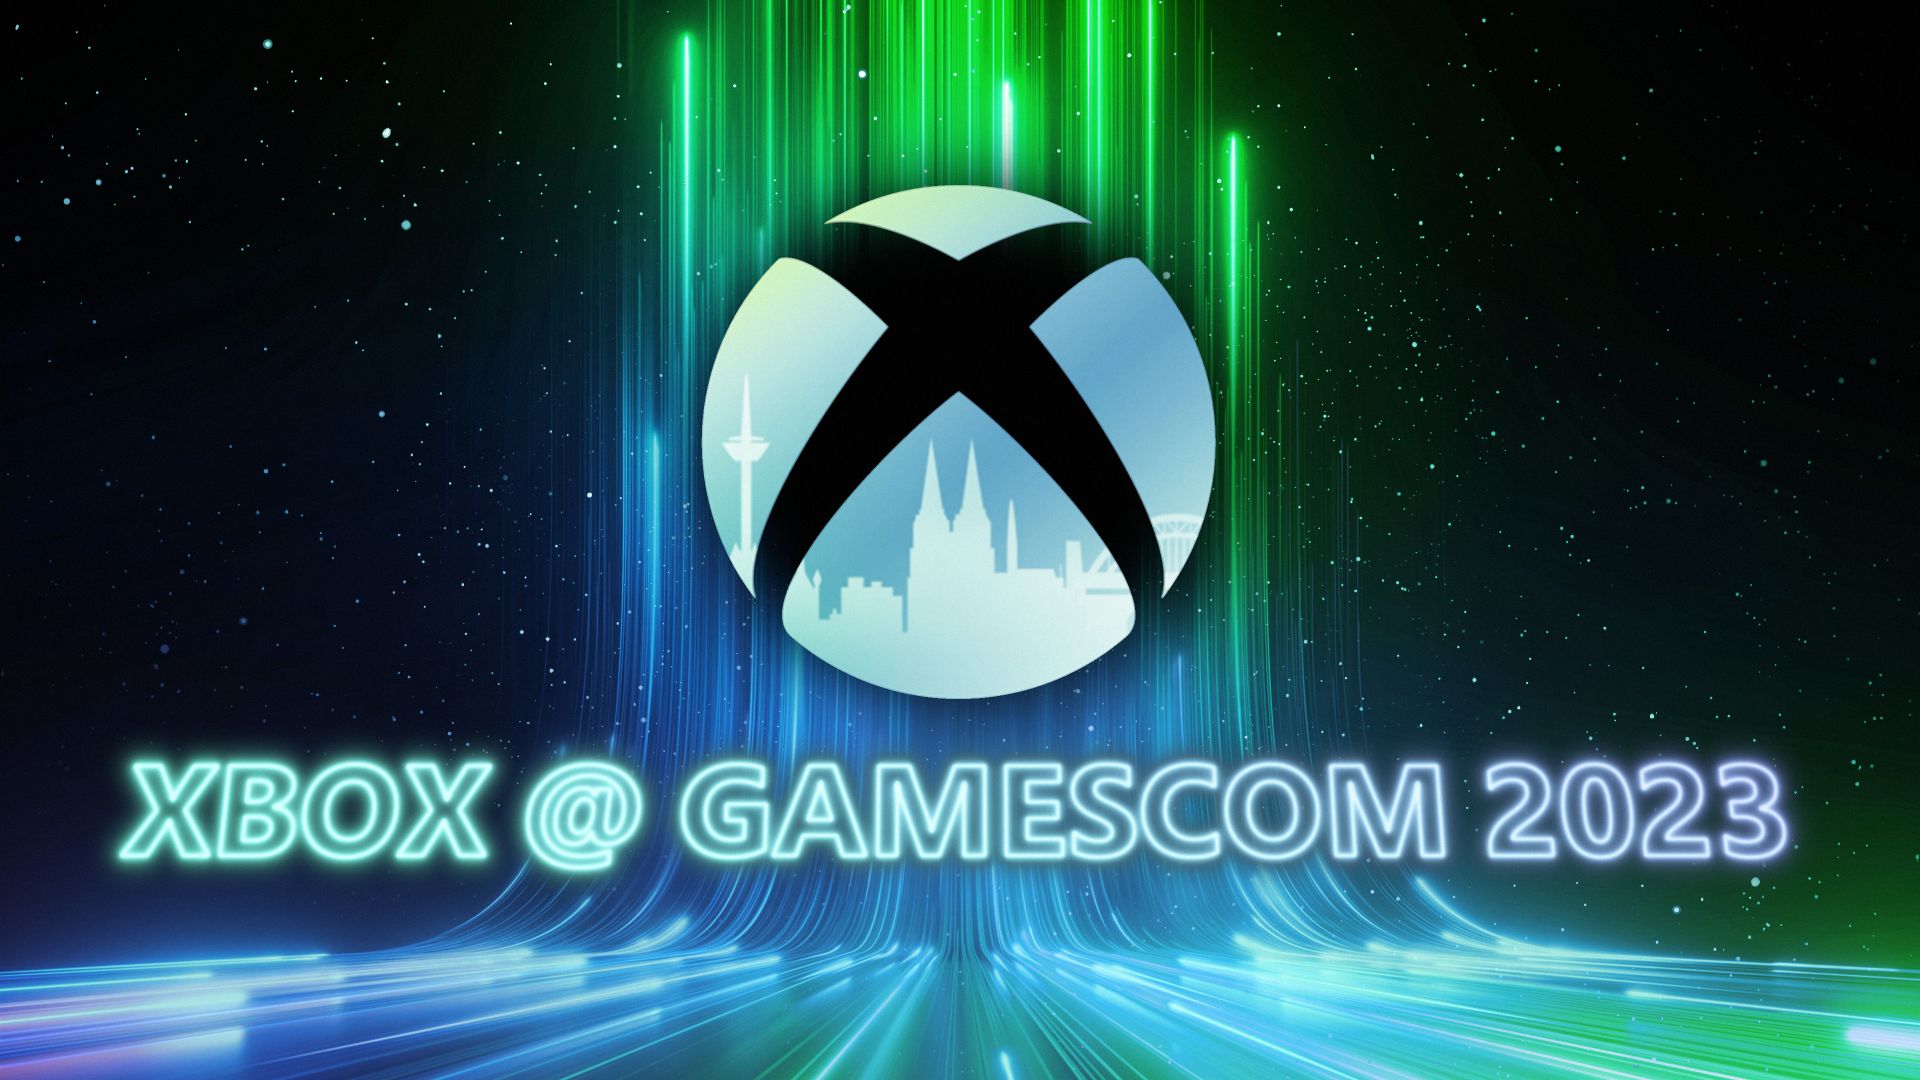 Watching Xbox at gamescom 2023: A Guide to Live Coverage from the Show Floor